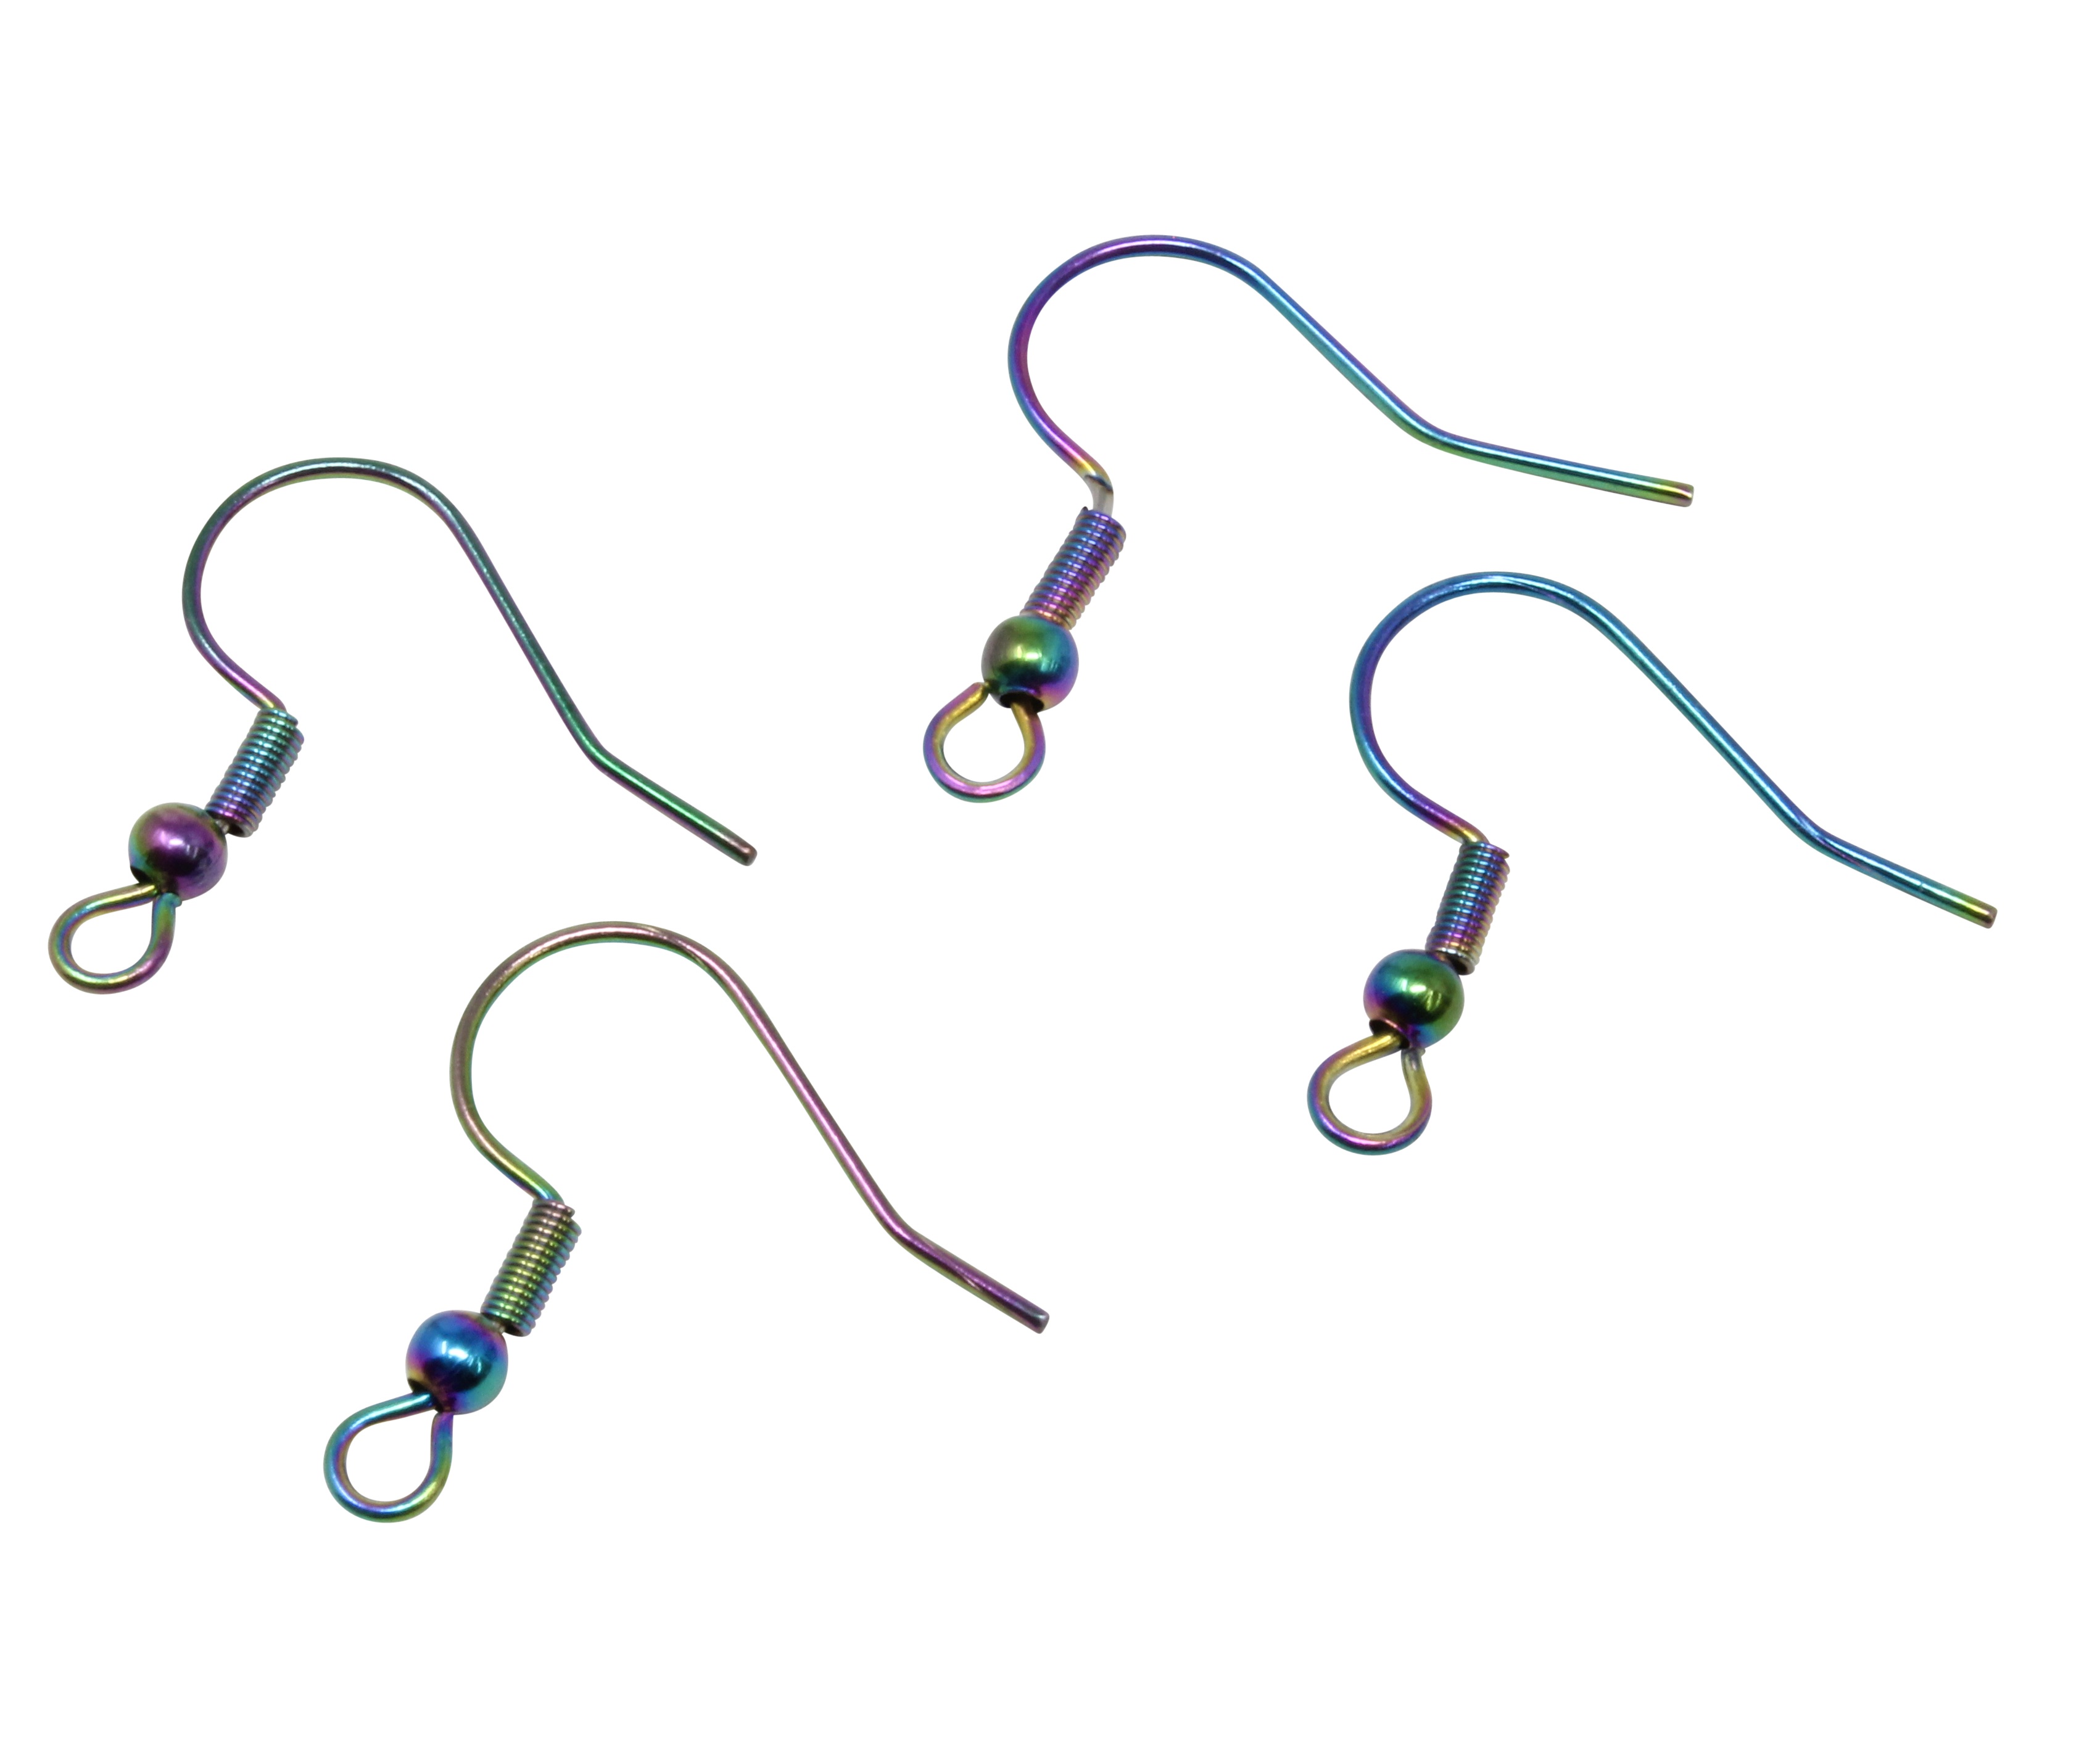 Findings & Essentials - Earring Wires - Hook Ear Wires - Bead World